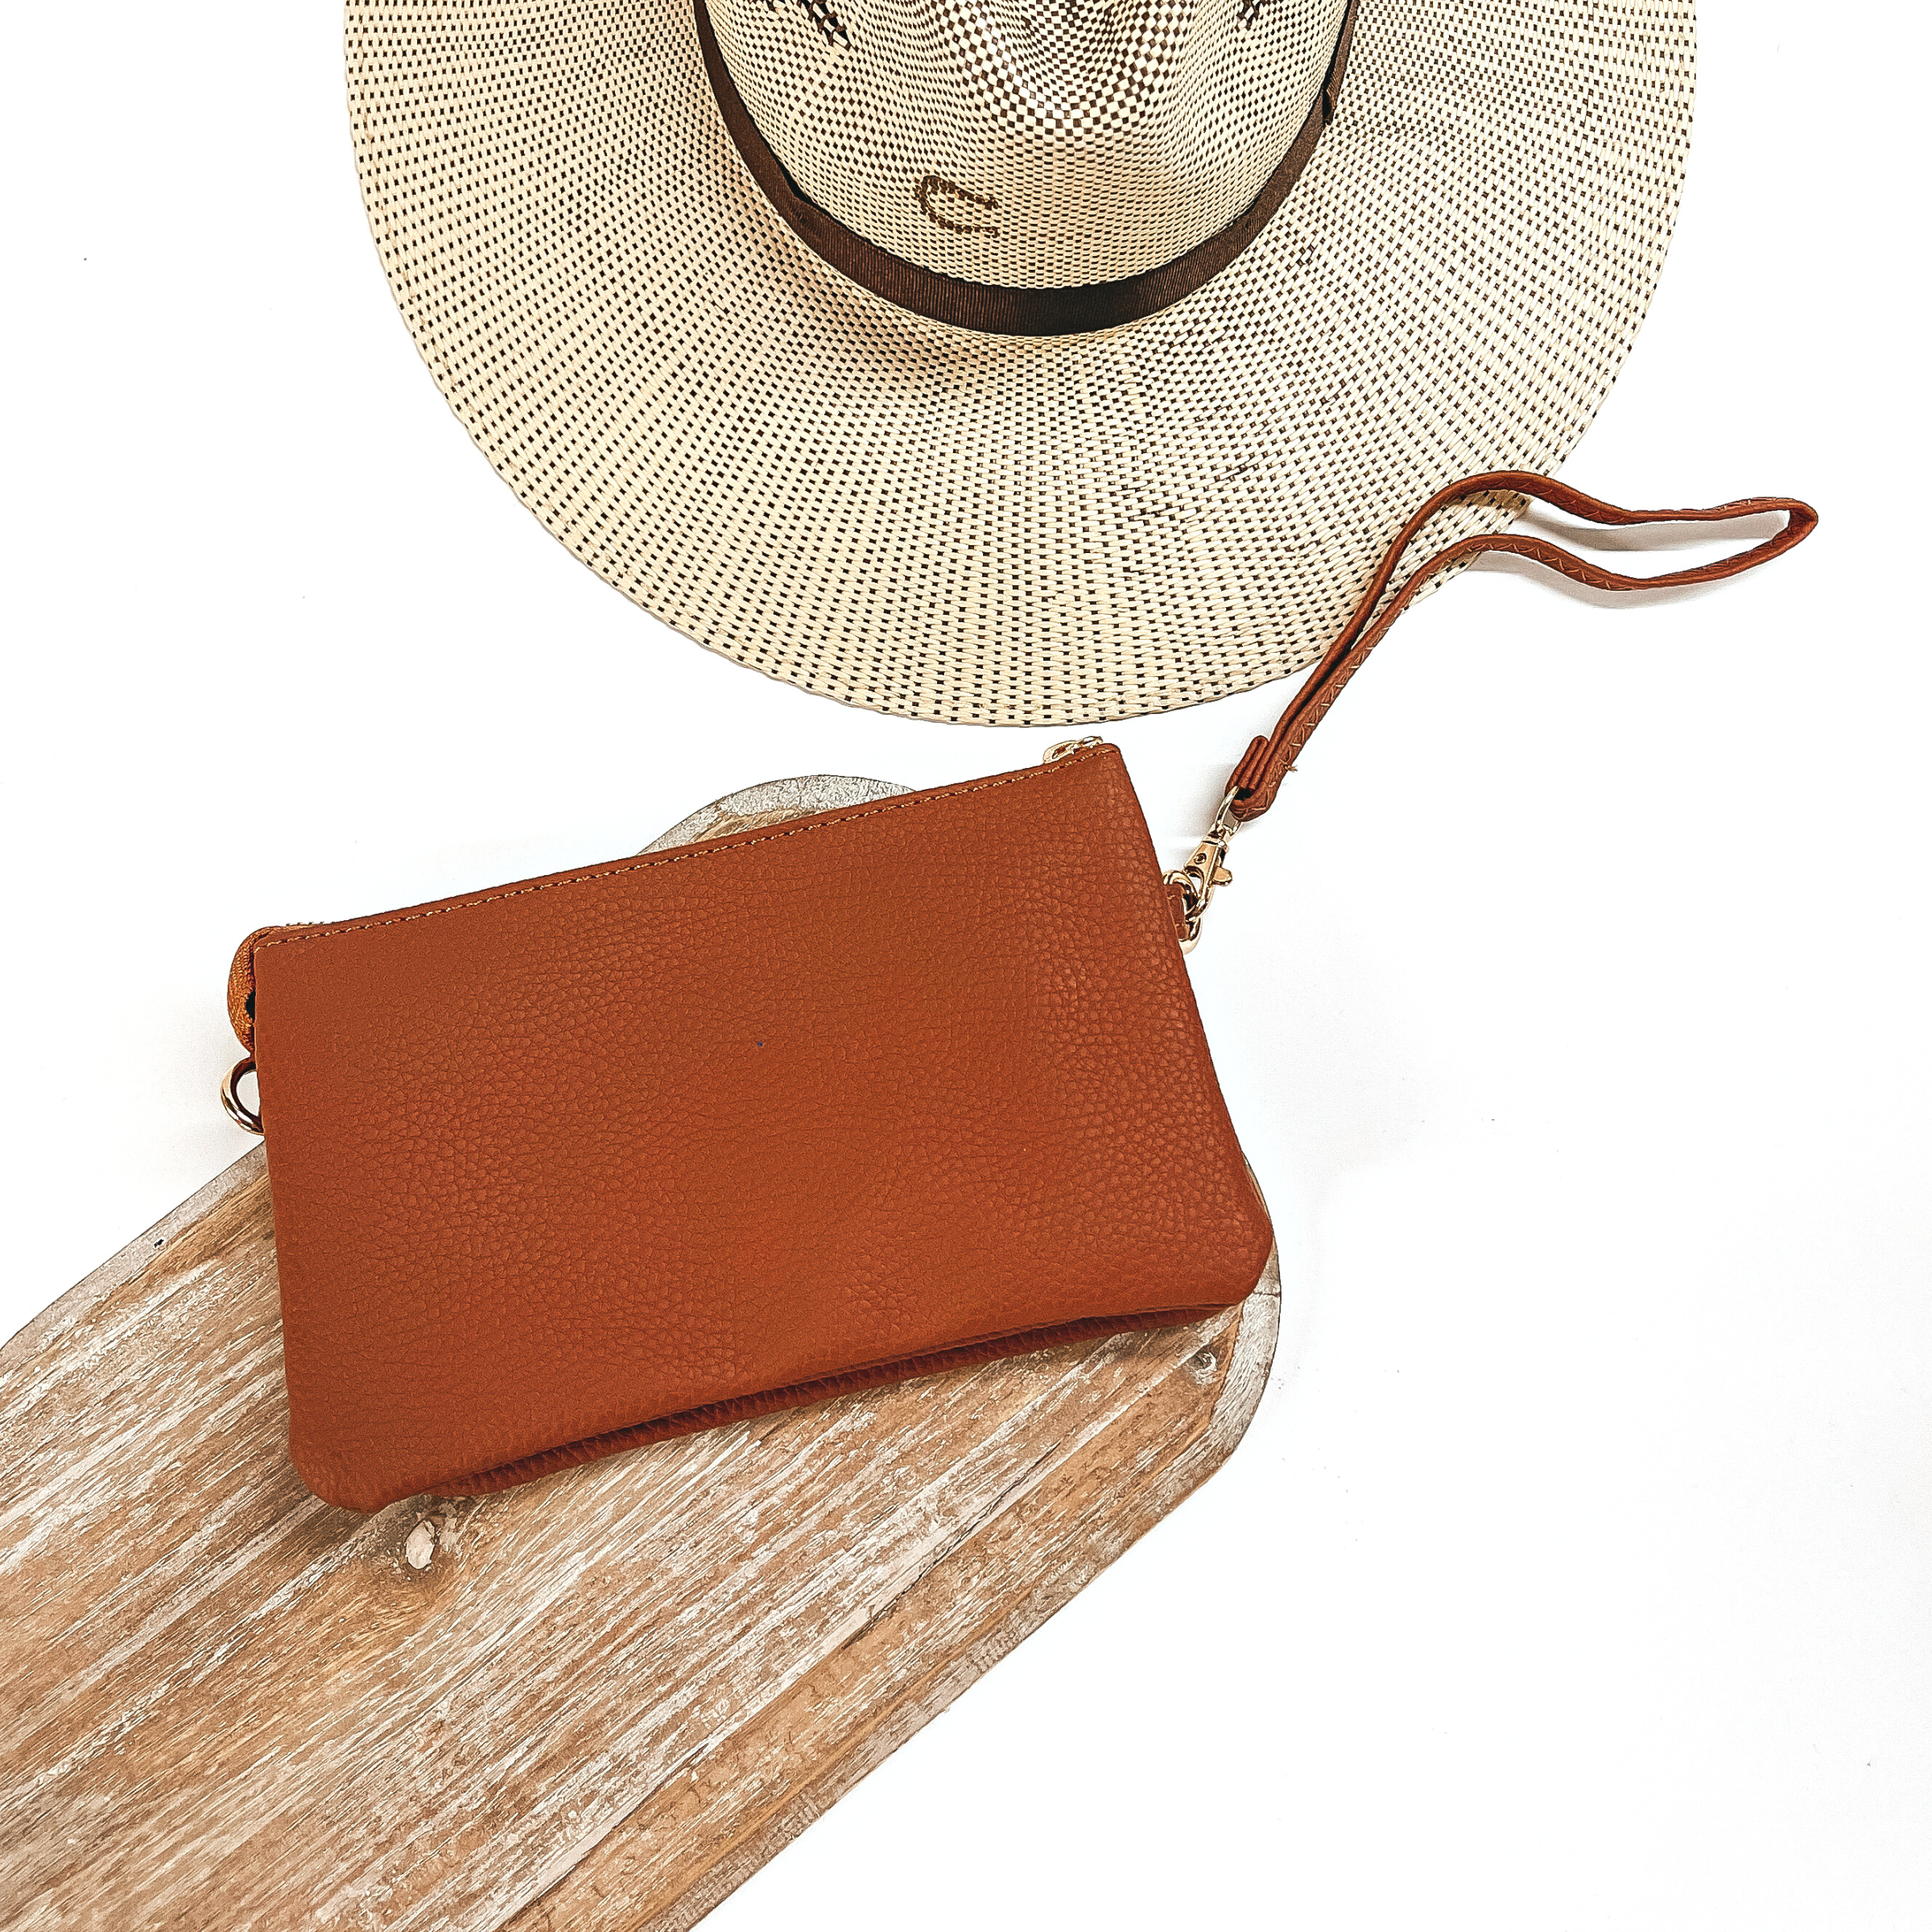 Dashing Darling Zip-Around Wallet with Removeable Strap in Tan - Giddy Up Glamour Boutique